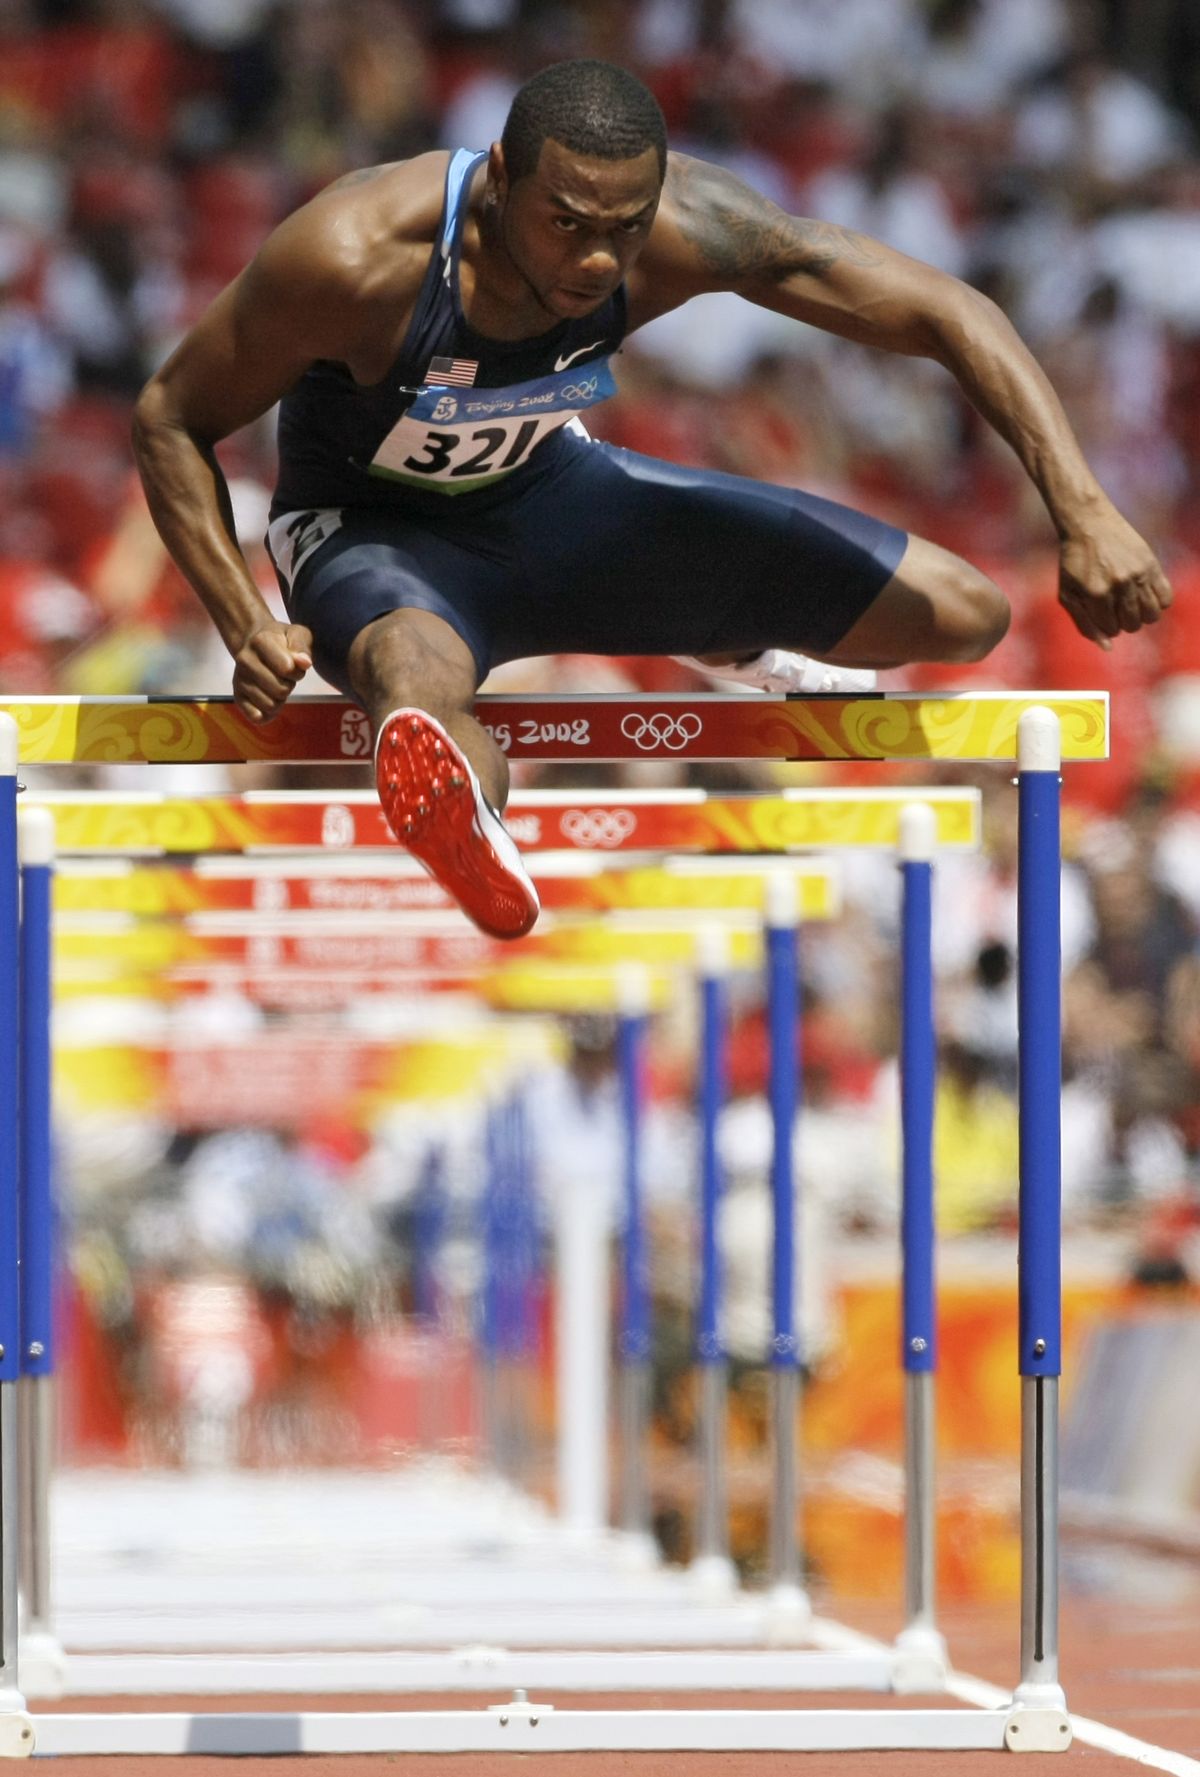 United States’ David Oliver is now among the favorites in the men’s 110-meter hurdles. (Associated Press / The Spokesman-Review)